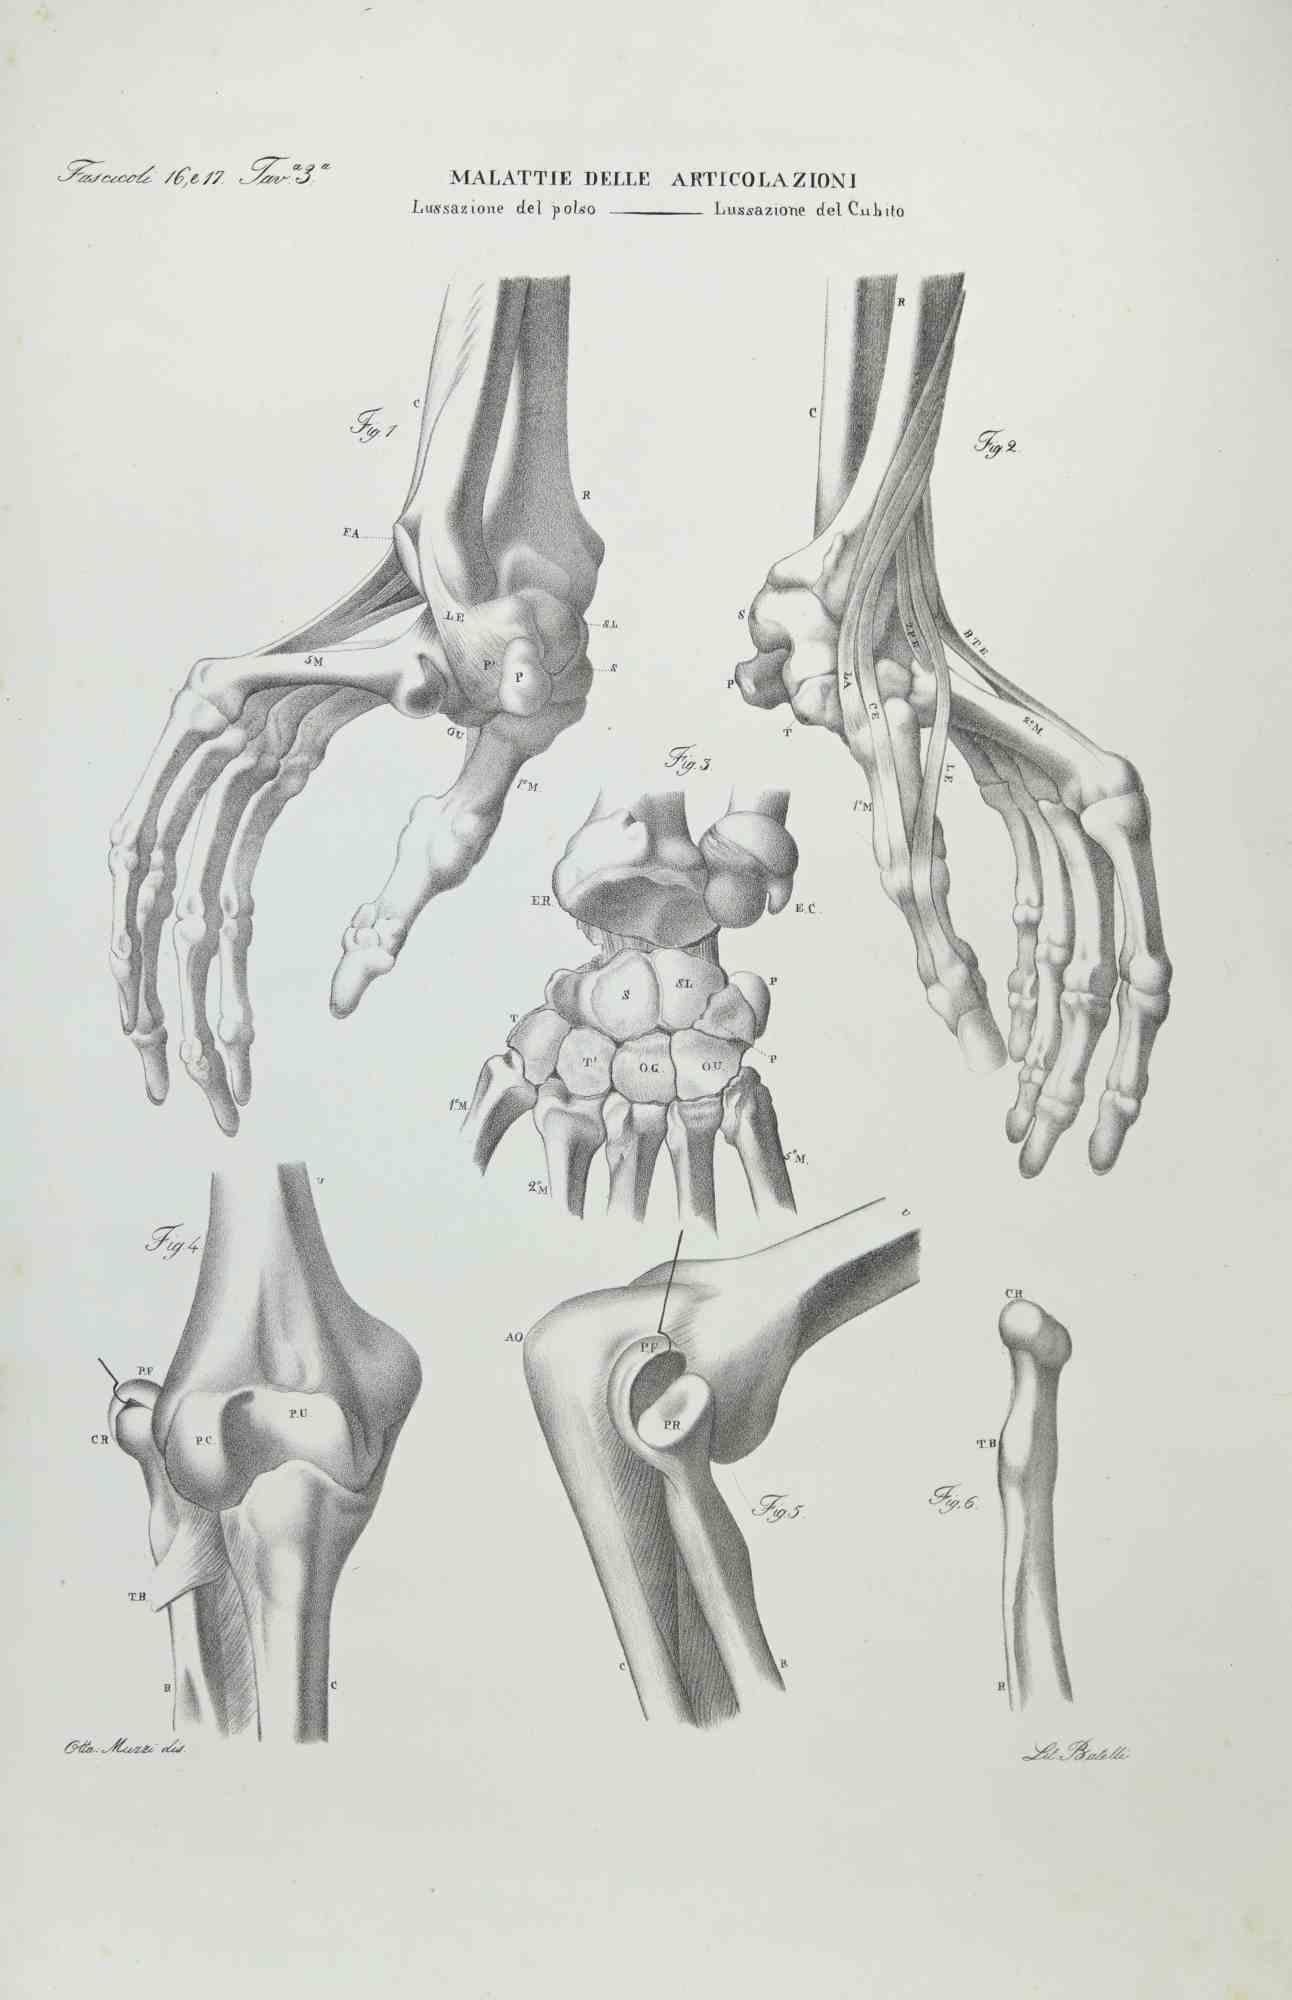 Joint Diseases is a lithograph hand colored by Ottavio Muzzi for the edition of Antoine Chazal, Human Anatomy, Printers Batelli and Ridolfi, realized in 1843.

Signed on plate on the left corner.

The artwork belongs to the "Atlante Generale della